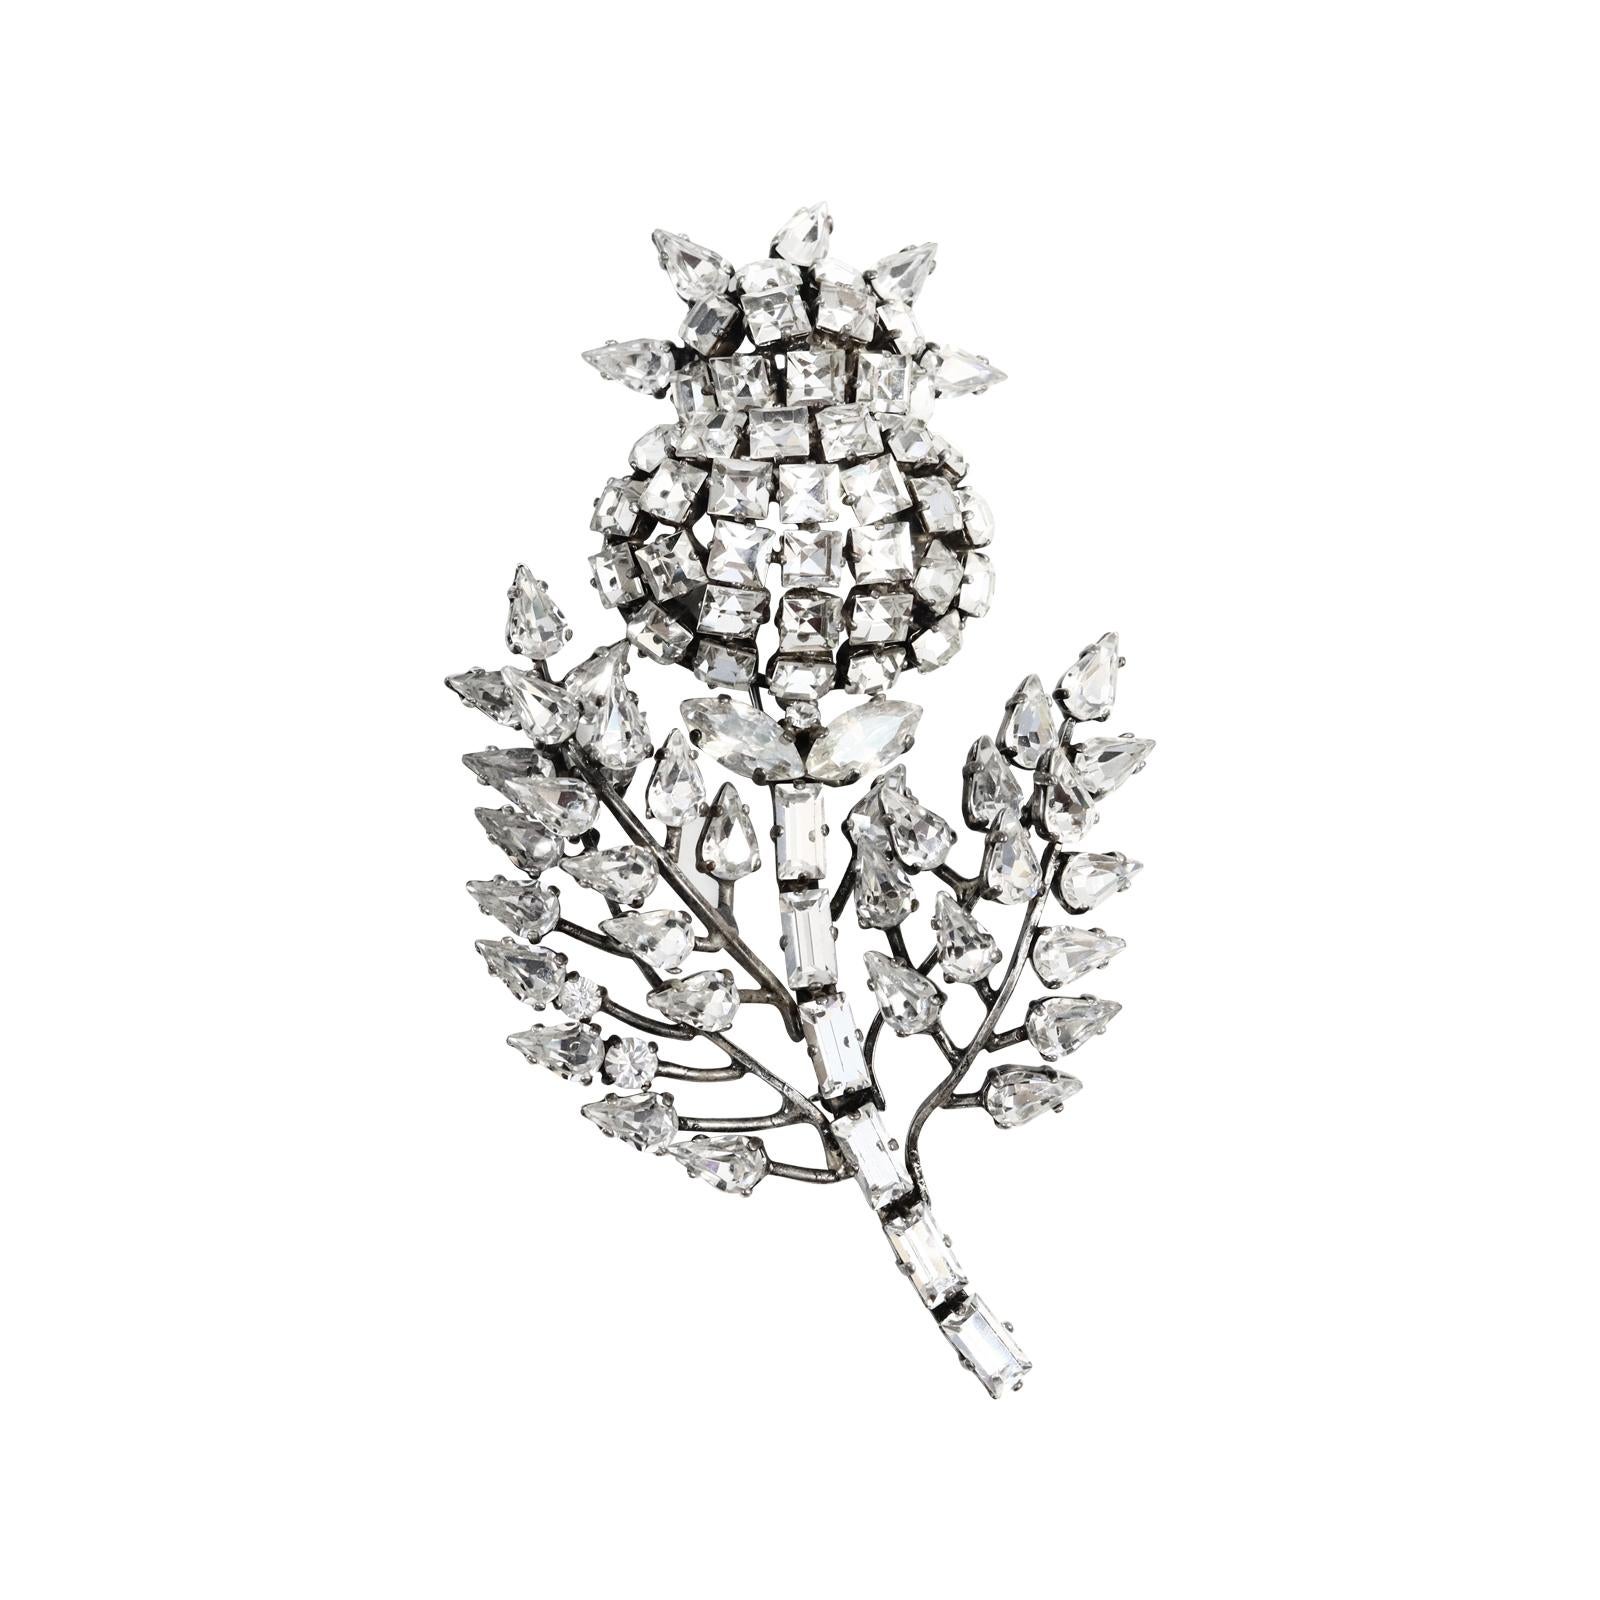 Contemporary Collectible Jacques Fath Large Crystal Brooch Circa 2007 For Sale